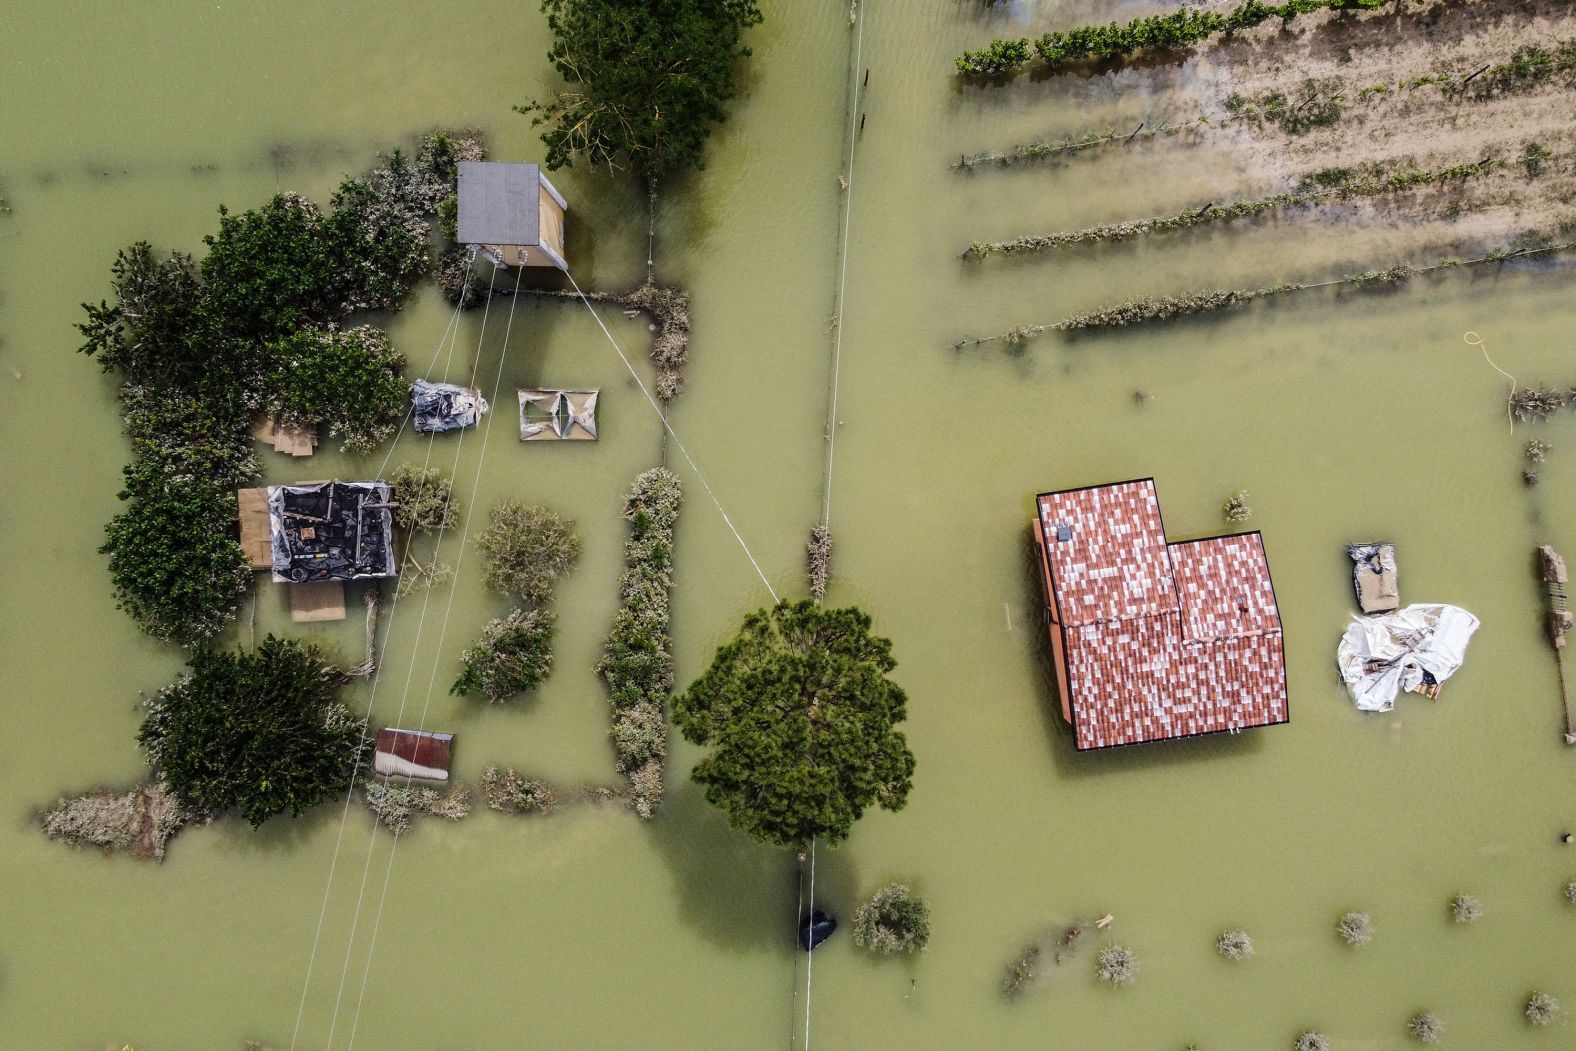 This aerial photo, taken on Thursday, May 18, shows a flooded street in Cesena, Italy. <a href="index.php?page=&url=https%3A%2F%2Fwww.cnn.com%2F2023%2F05%2F17%2Feurope%2Fitaly-flooding-three-killed-rain-intl%2Findex.html" target="_blank">At least nine people have been killed by heavy flooding and mudslides</a> in the northern Italian region of Emilia Romagna, and as many as 20,000 residents are being forced to evacuate, according to local authorities.